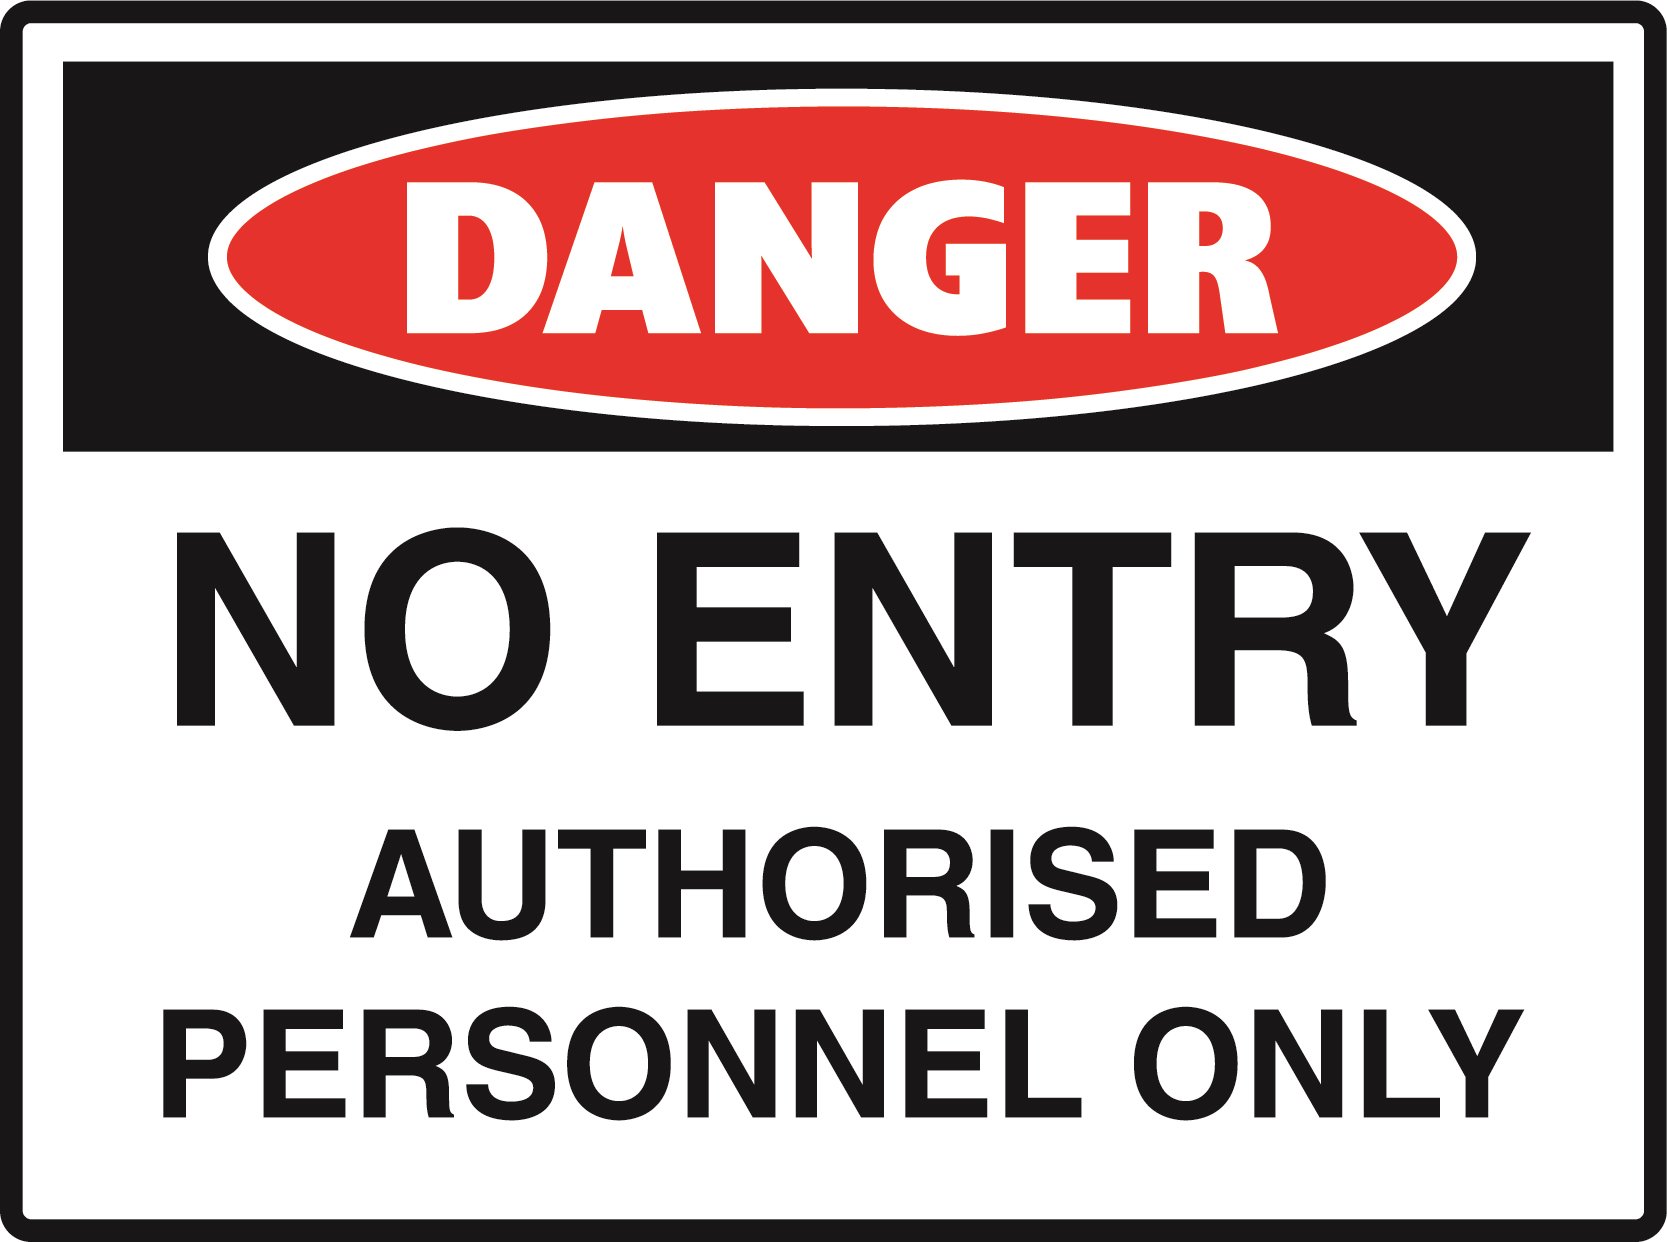 Danger - No Entry Authorised Persons Only - Metal